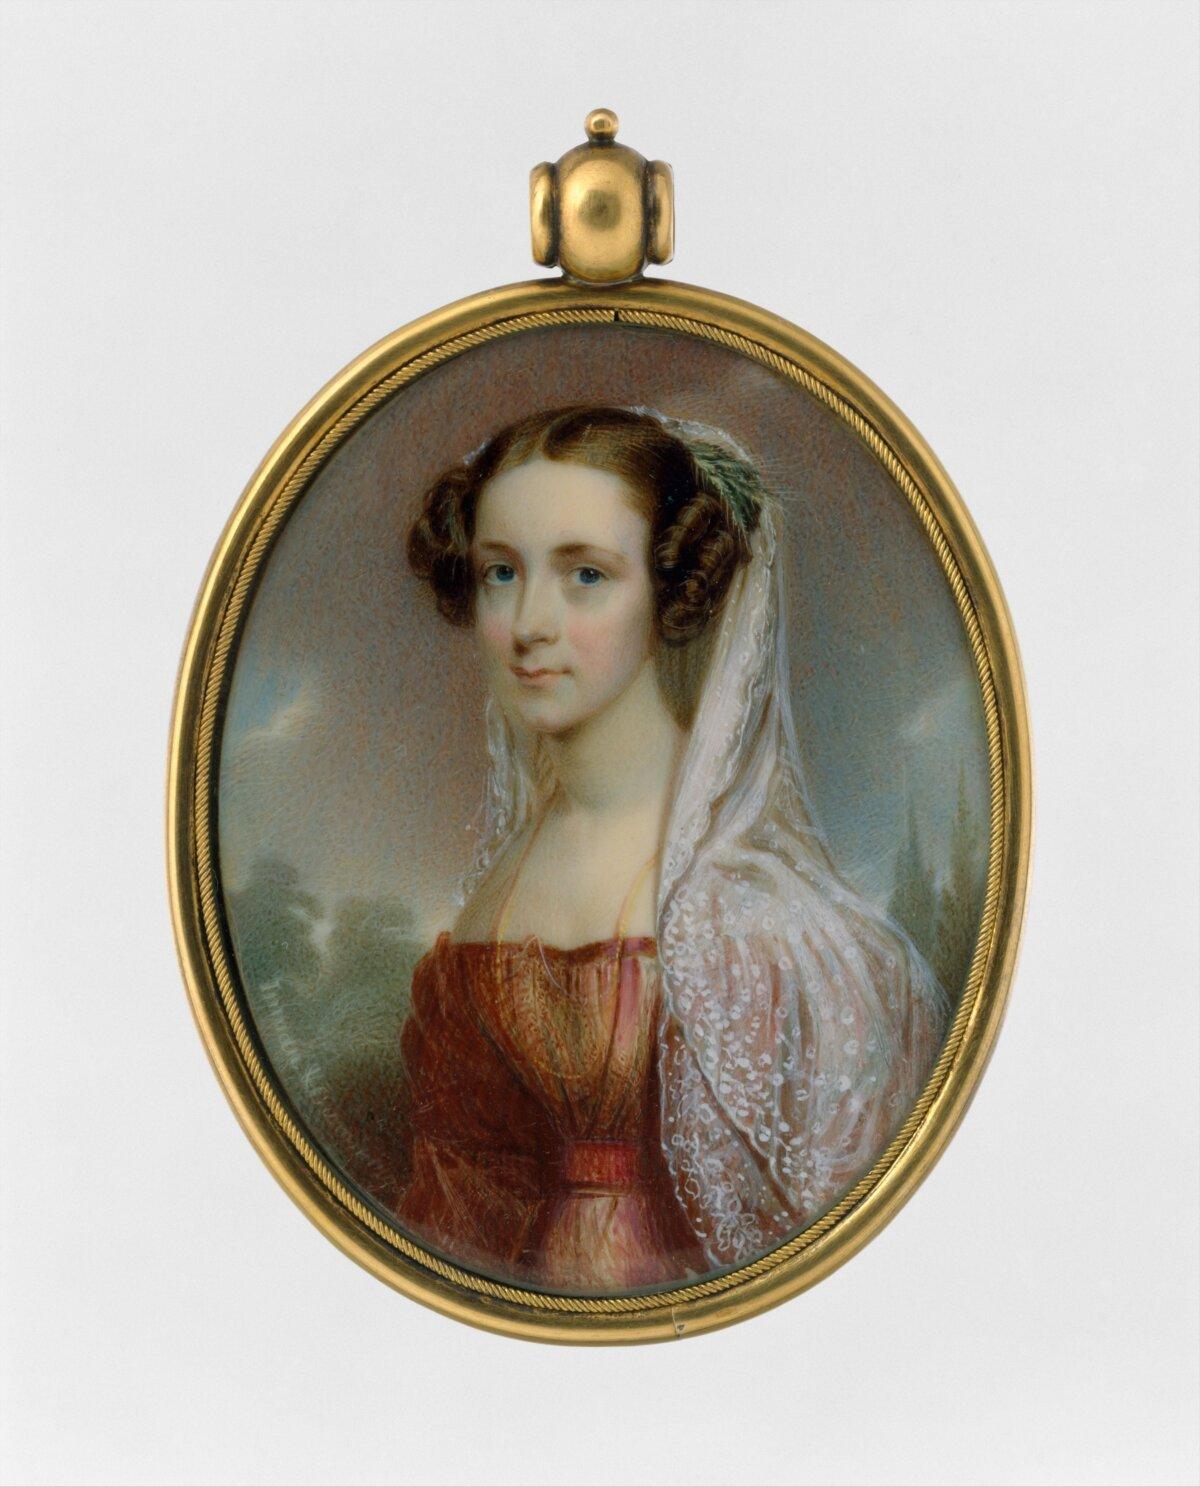 “Portrait of a Lady” by Henry Inman and Thomas Seir Cummings, circa 1827. Watercolor on ivory; 2 inches by 3 inches. The Metropolitan Museum of Art, New York. (Public Domain)